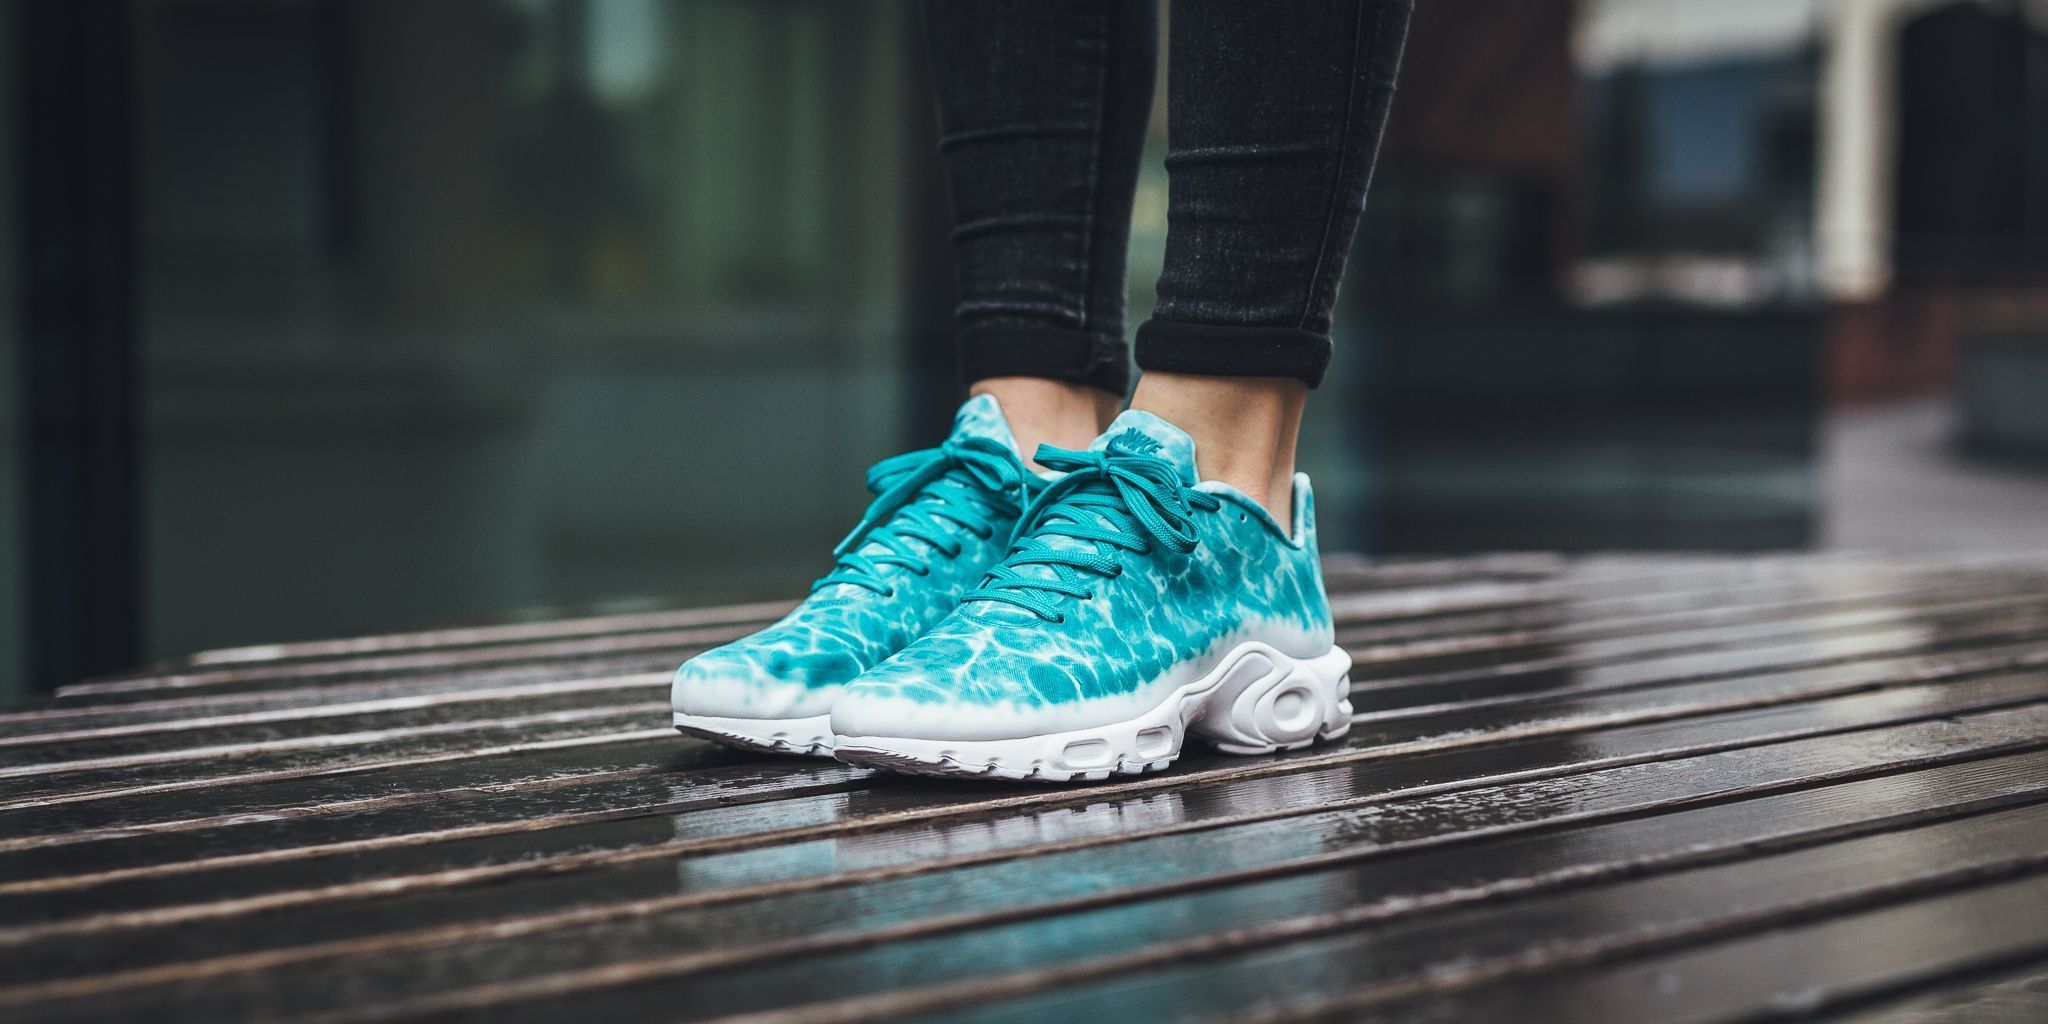 Titolo on Twitter: "ONLINE NOW! Nike Air Max Plus GPX Premium SP - Turbo  Green/Turbo Green-White SHOP HERE: https://t.co/KtTqYEqcV6 #requin  #swimmingpool https://t.co/pD7s6DPBuP" / Twitter